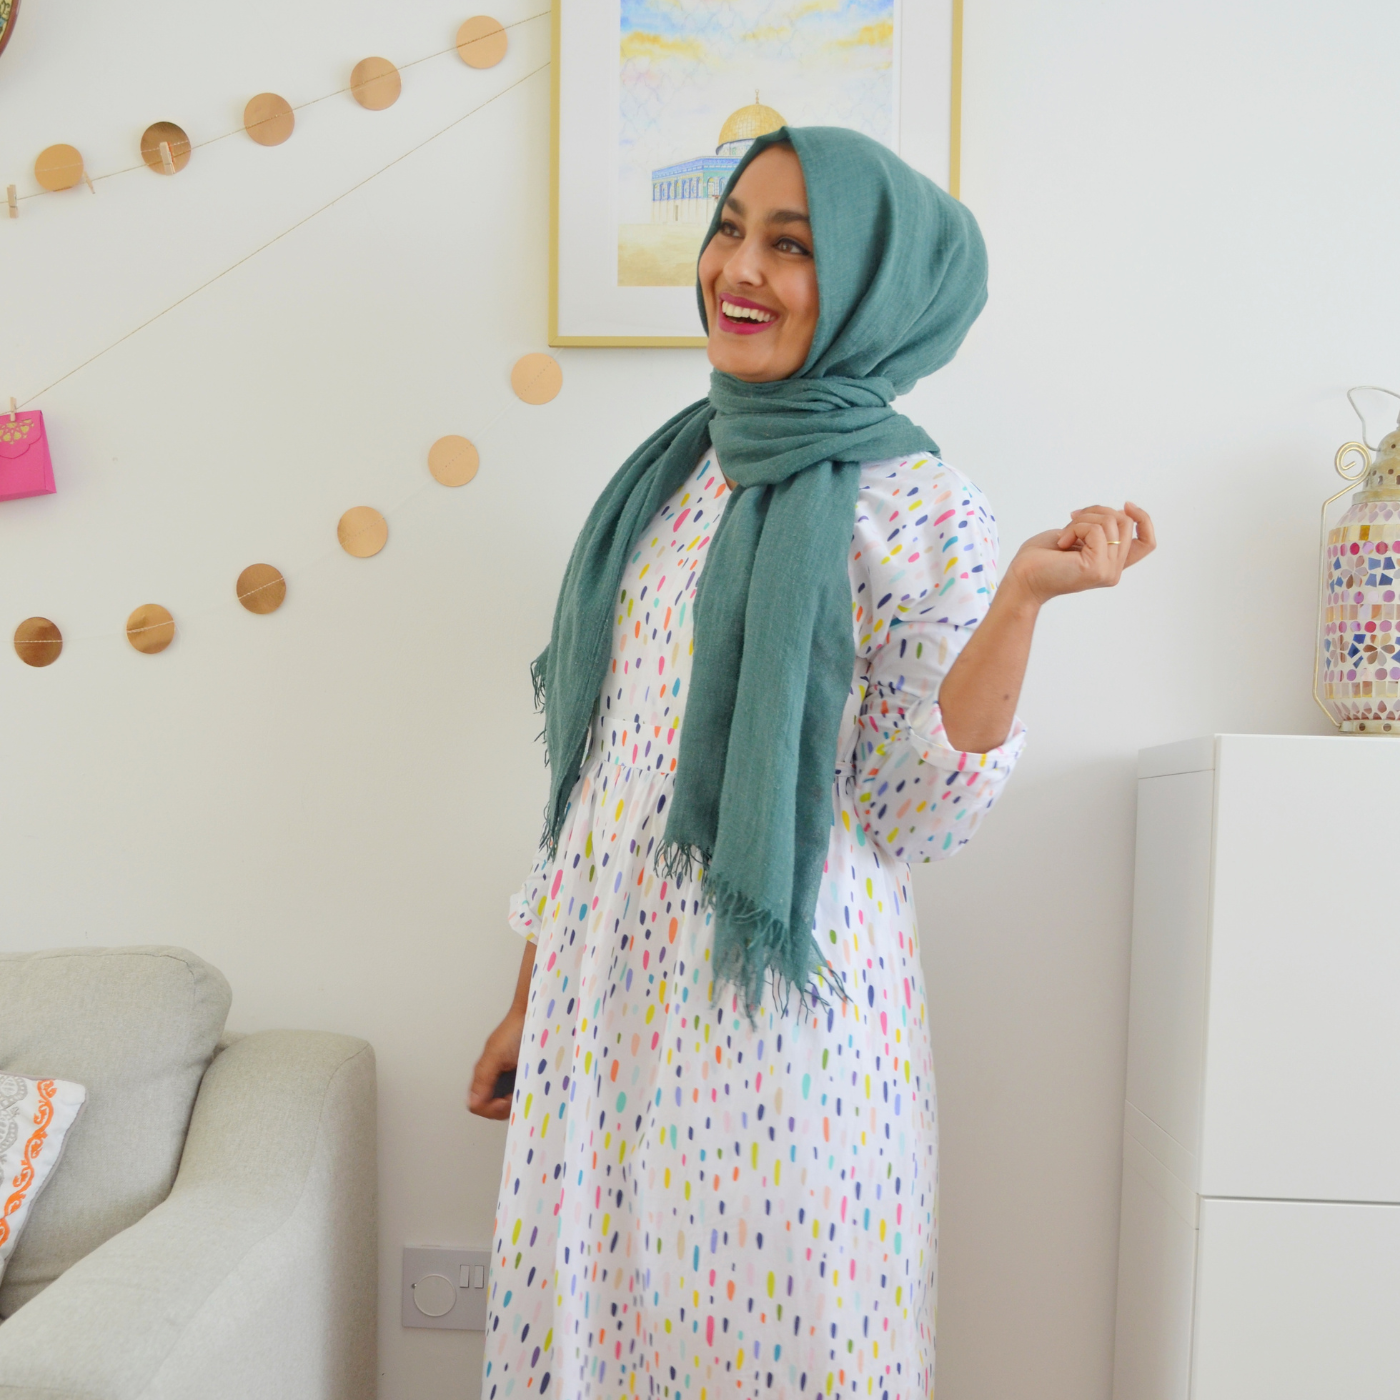 Rumana Dawood stands smiling, looking up and away from the camera. She is wearing a light blue hijab and a long-sleeved white dress with small blue, pink, olive green and dark blue brushstrokes. She is standing in front of a blue-and-yellow painting and next to a white chair on the left and a white bookshelf to the right. A garland of light brown dots hangs over the chair and from the painting, extending to the left.